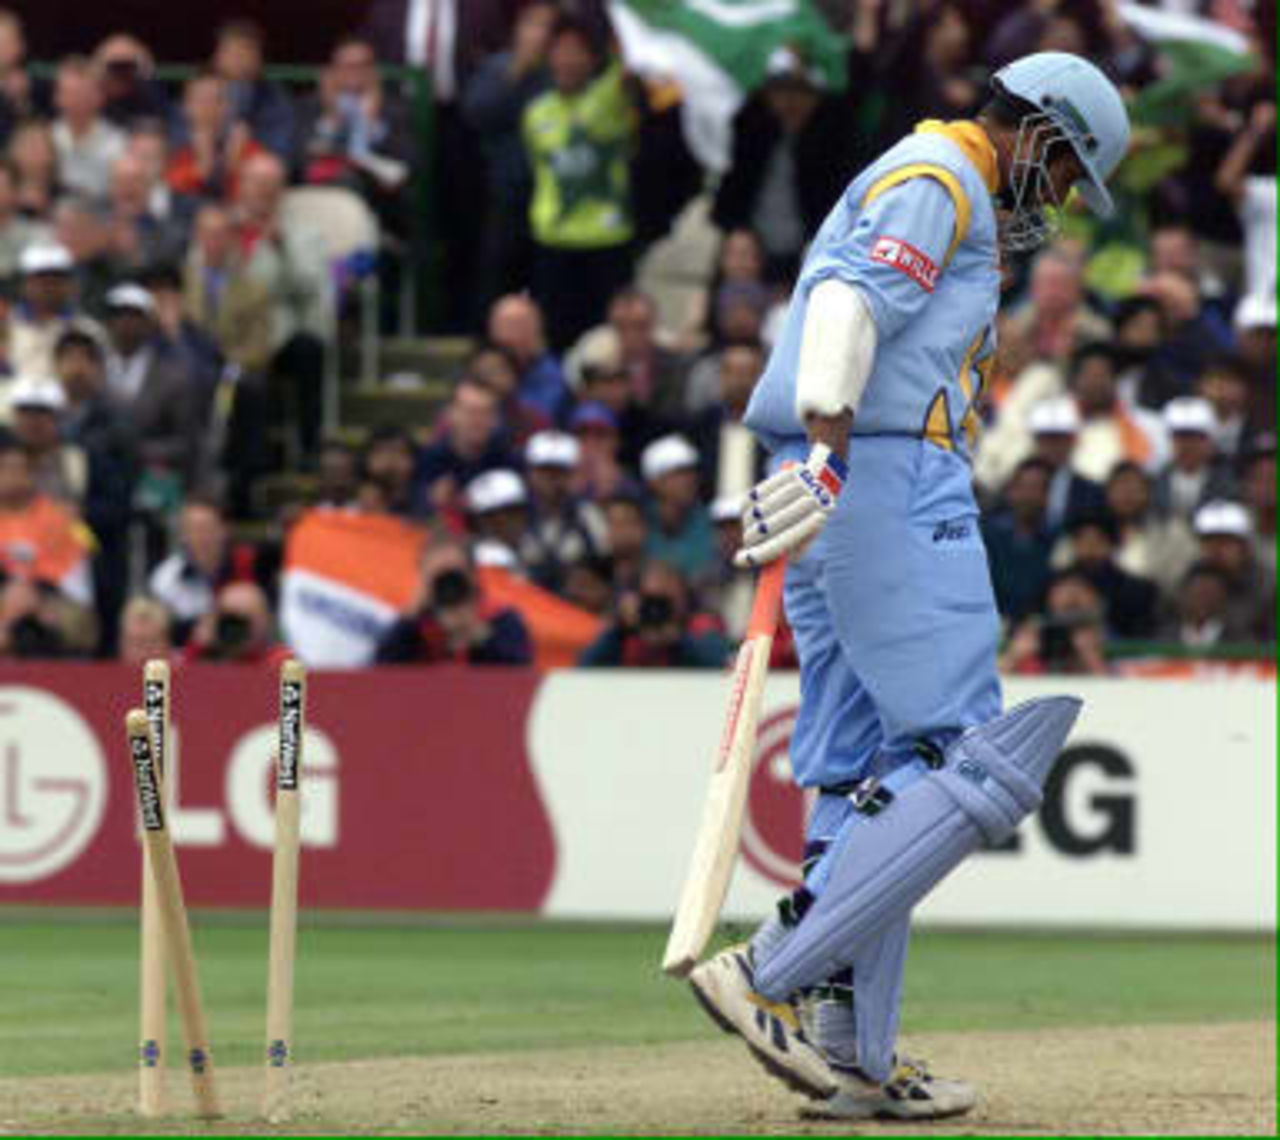 Sadagopan Ramesh of India walks away from the wicket after being bowled out at Old Trafford 08 June 1999 during the super six match of the Cricket World Cup match in Manchester